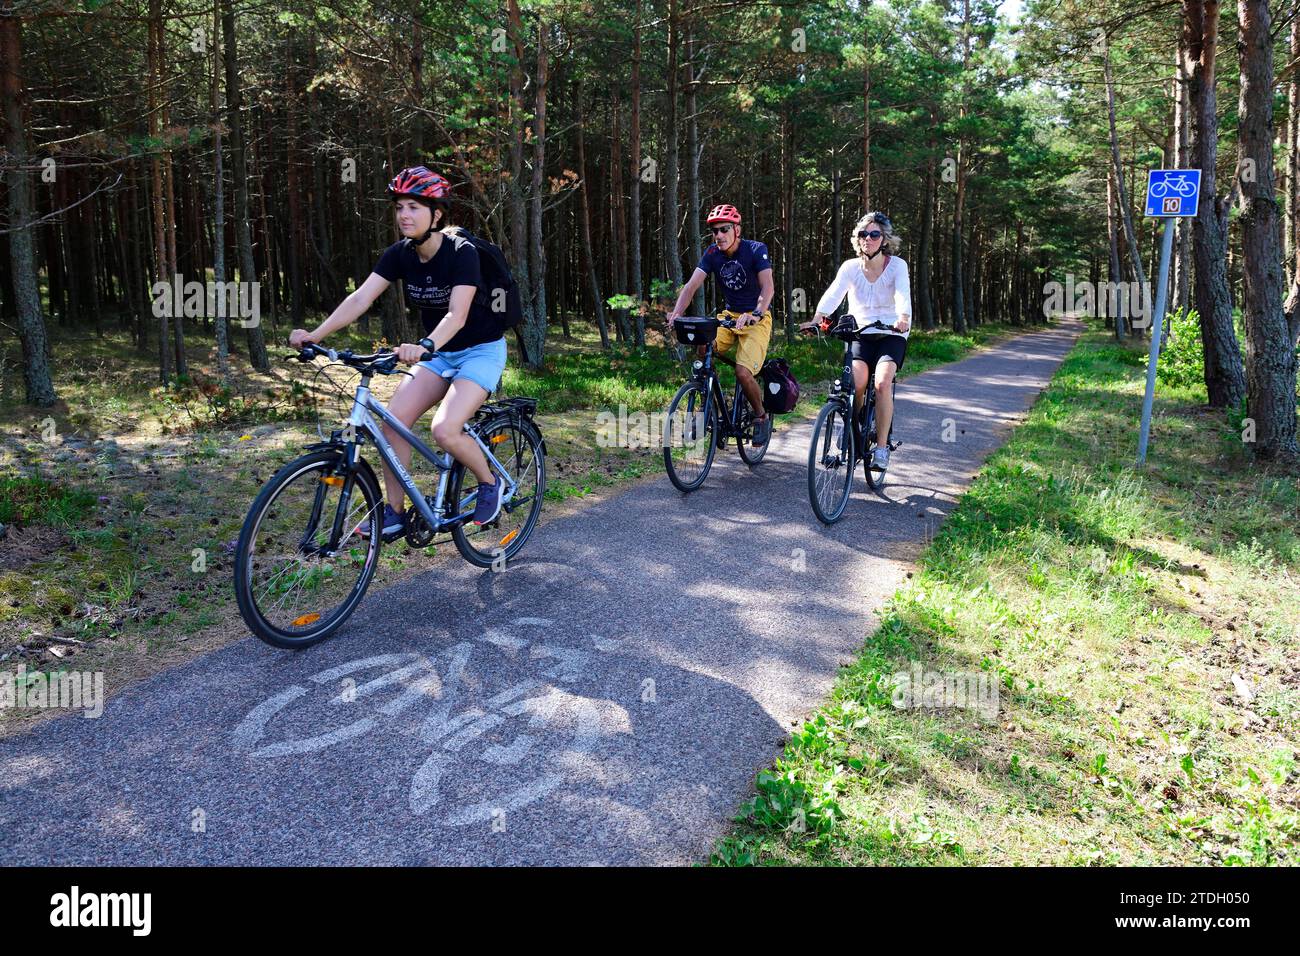 Cyclist on cycle path no. 10 of the Curonian Spit, Juodkrante, Lithuania Stock Photo